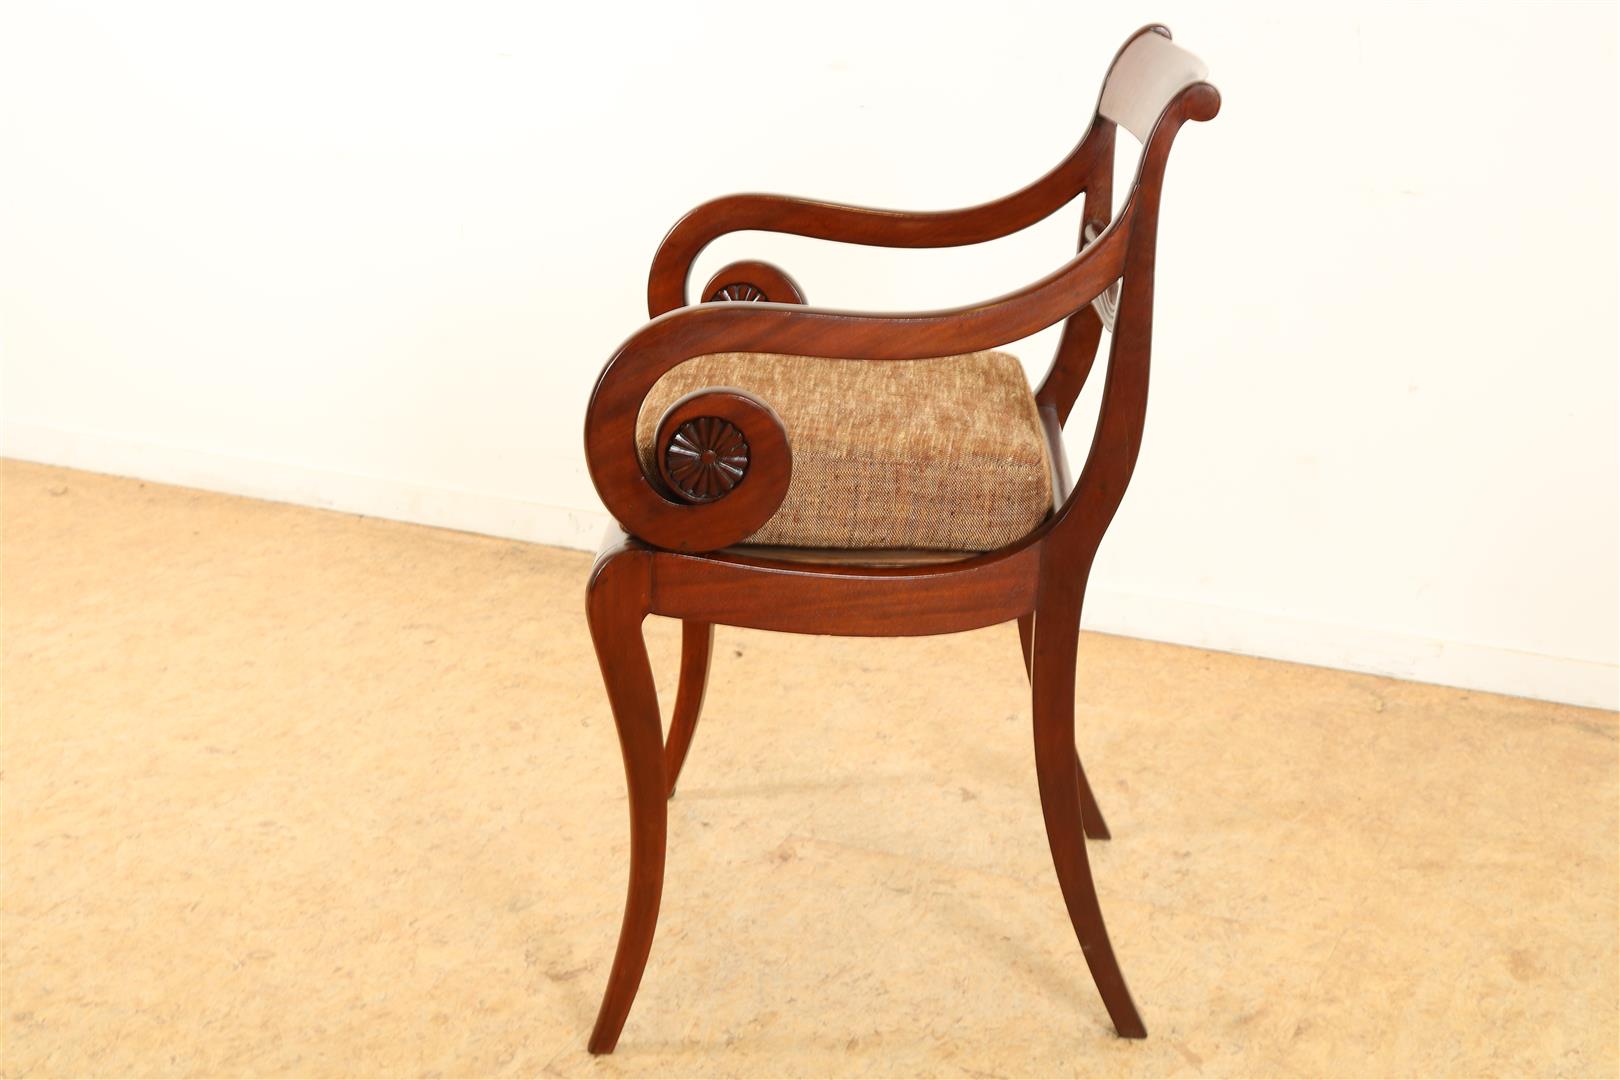 Mahogany Empire office chair with fabric seat, late 19th century. - Image 2 of 4